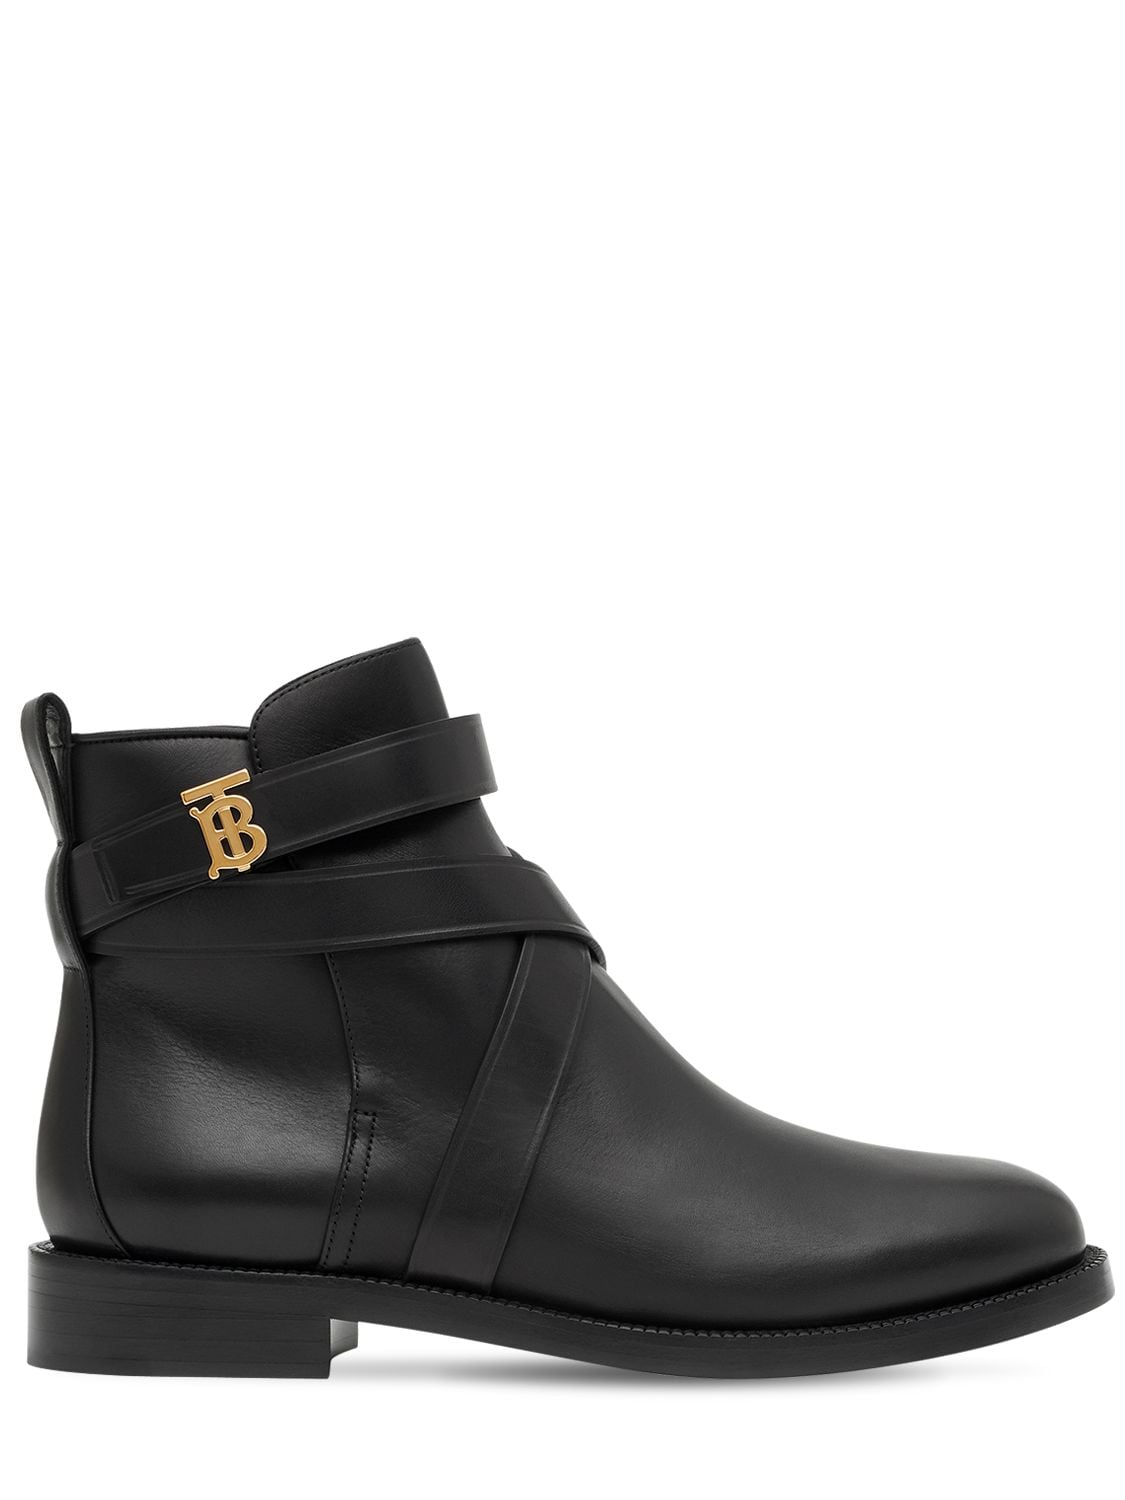 BURBERRY 20MM PRYLE LEATHER ANKLE BOOTS,70ILO0010-QTEXODK1